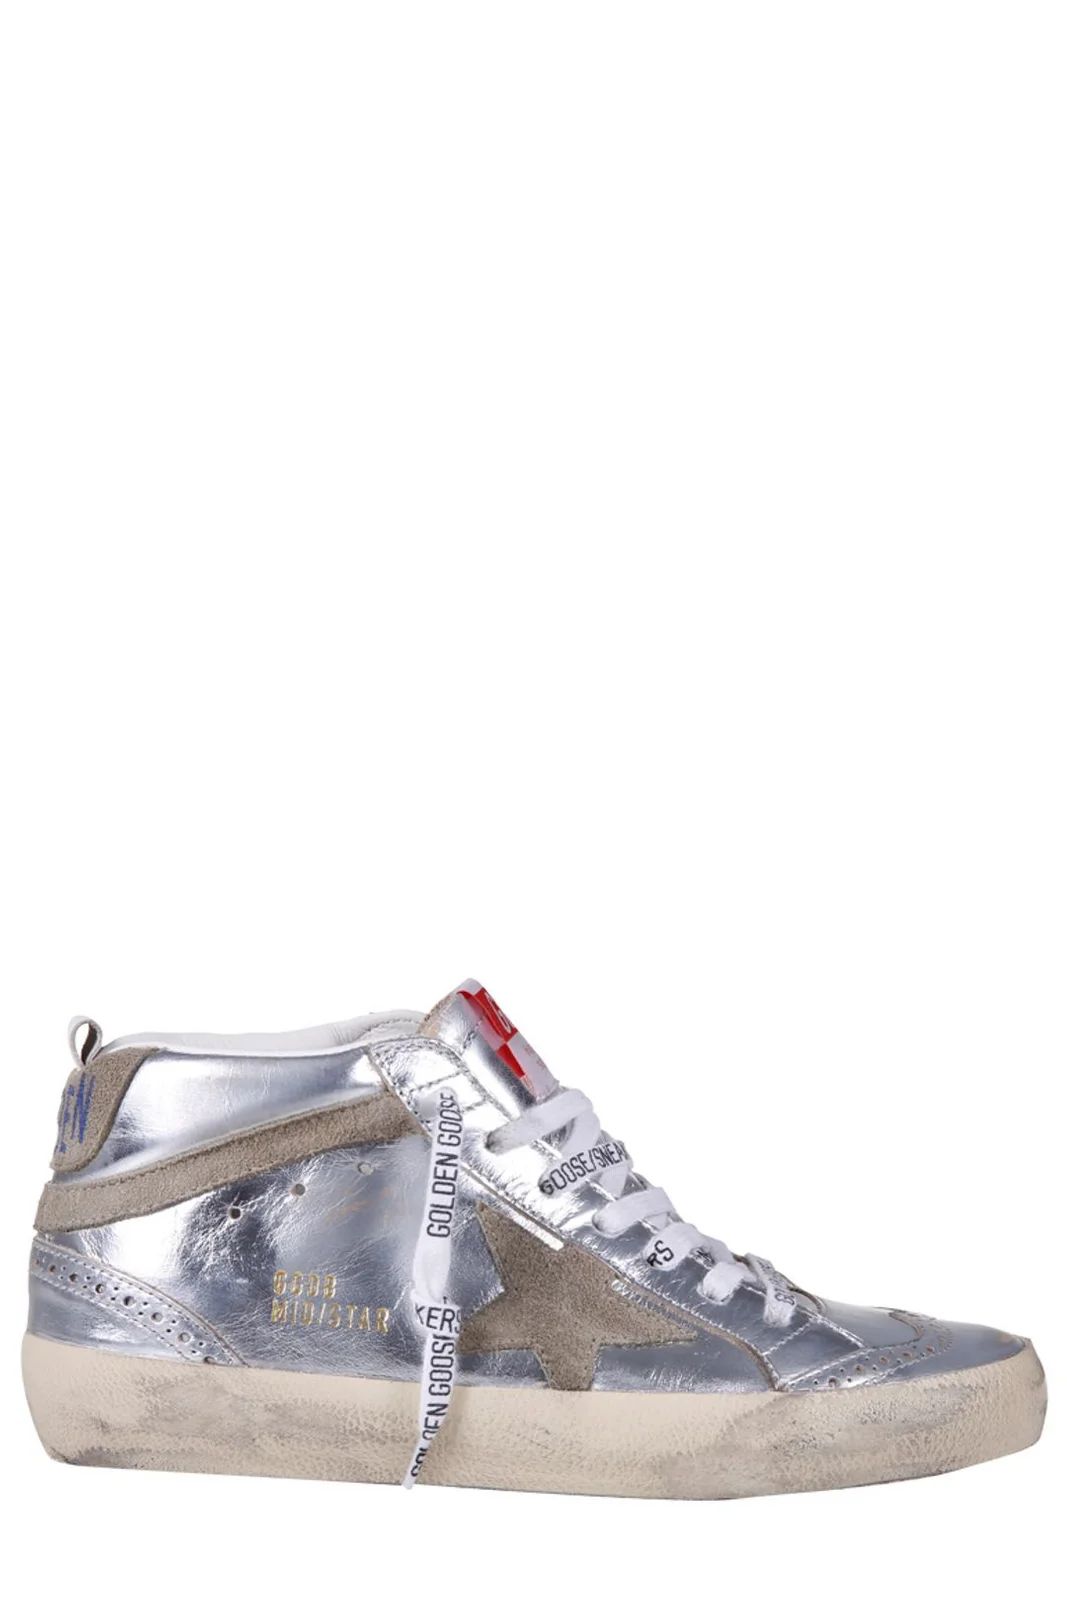 Golden Goose Deluxe Brand Star Patch Sneakers | Cettire Global